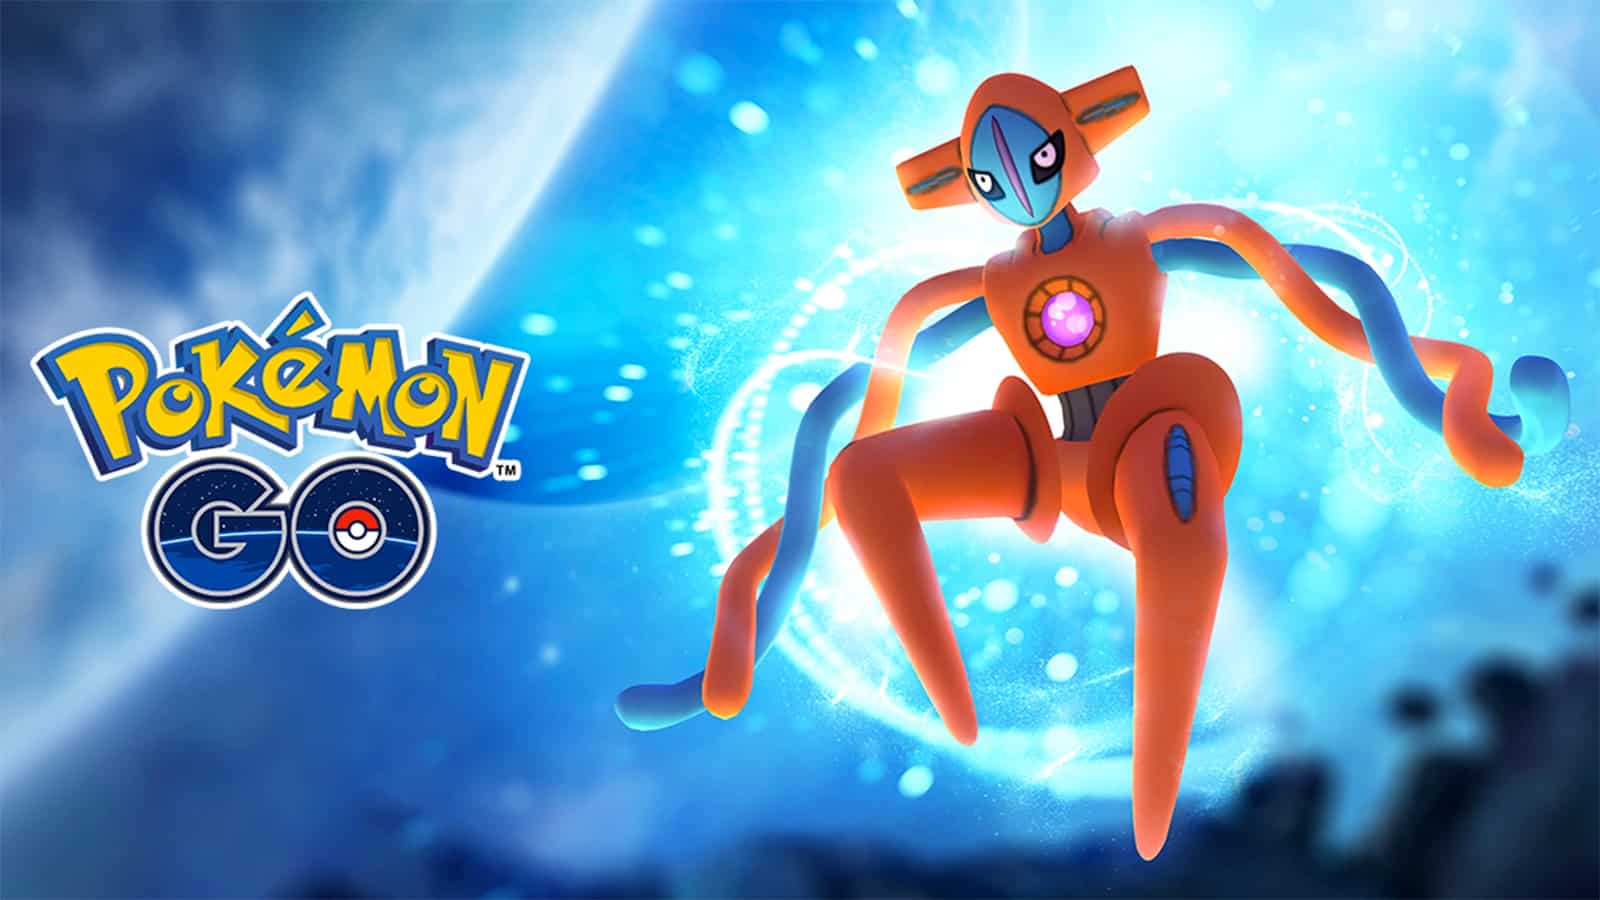 The Deoxys forms in Pokemon Go